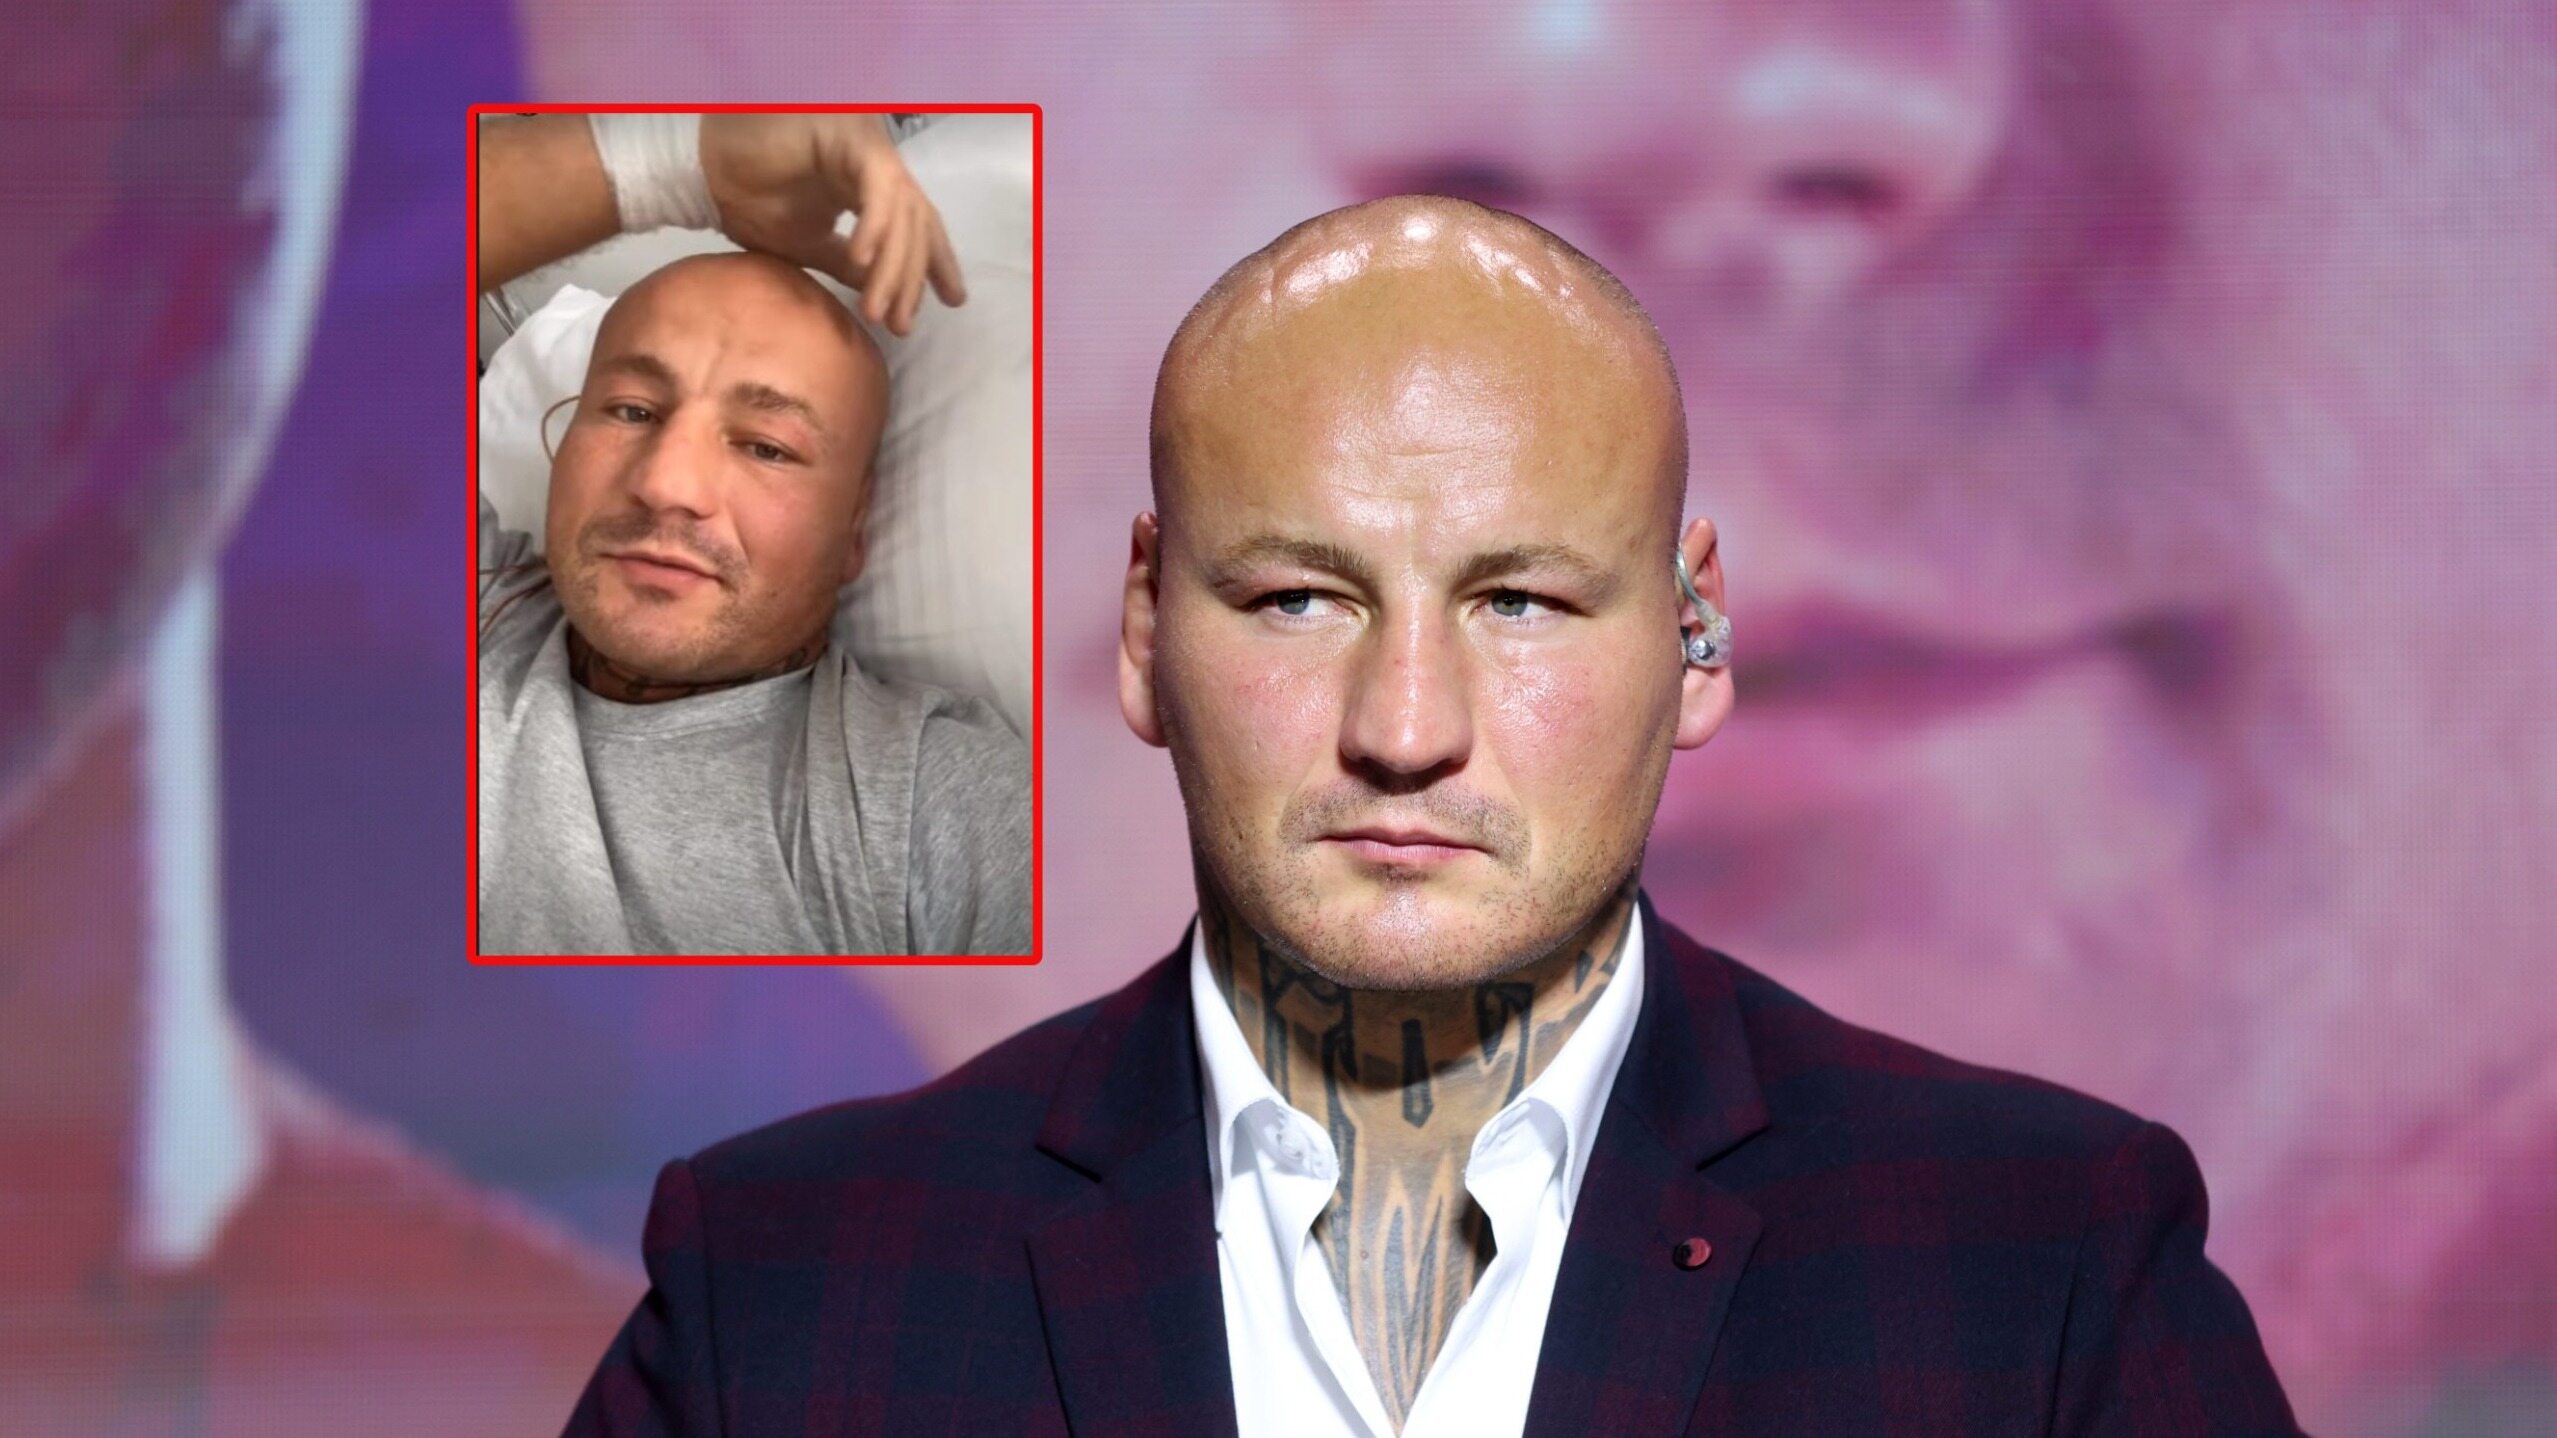 Artur Szpilka received an unpleasant diagnosis, and he had previously been disregarded.  "Tragedy"